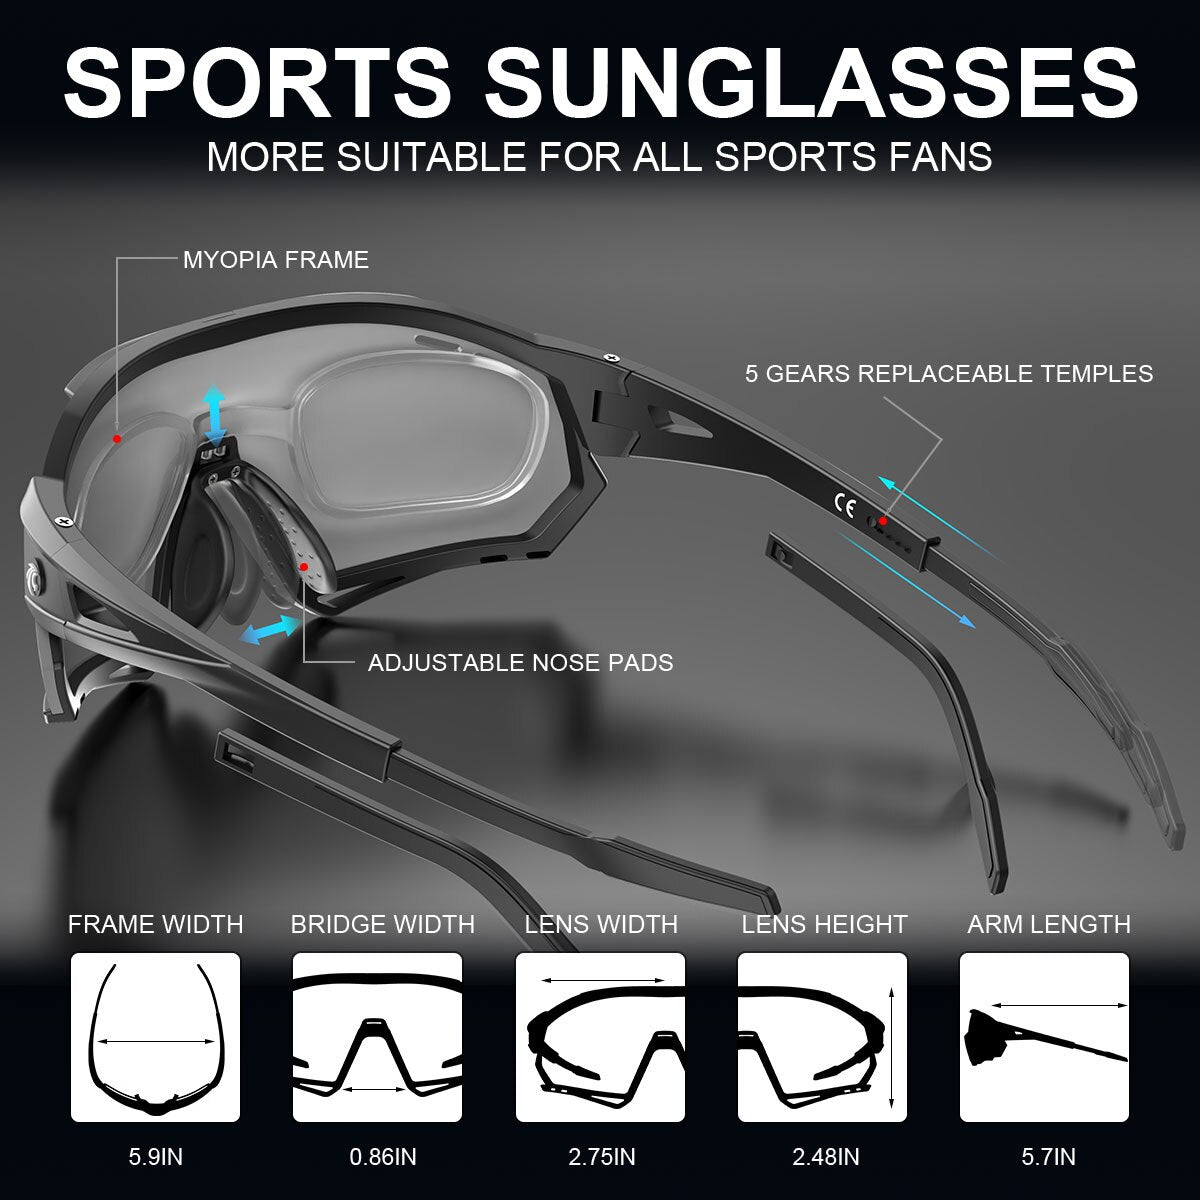 EXS Replacement 3 Lens Cycling Sunglasses - X-Tiger